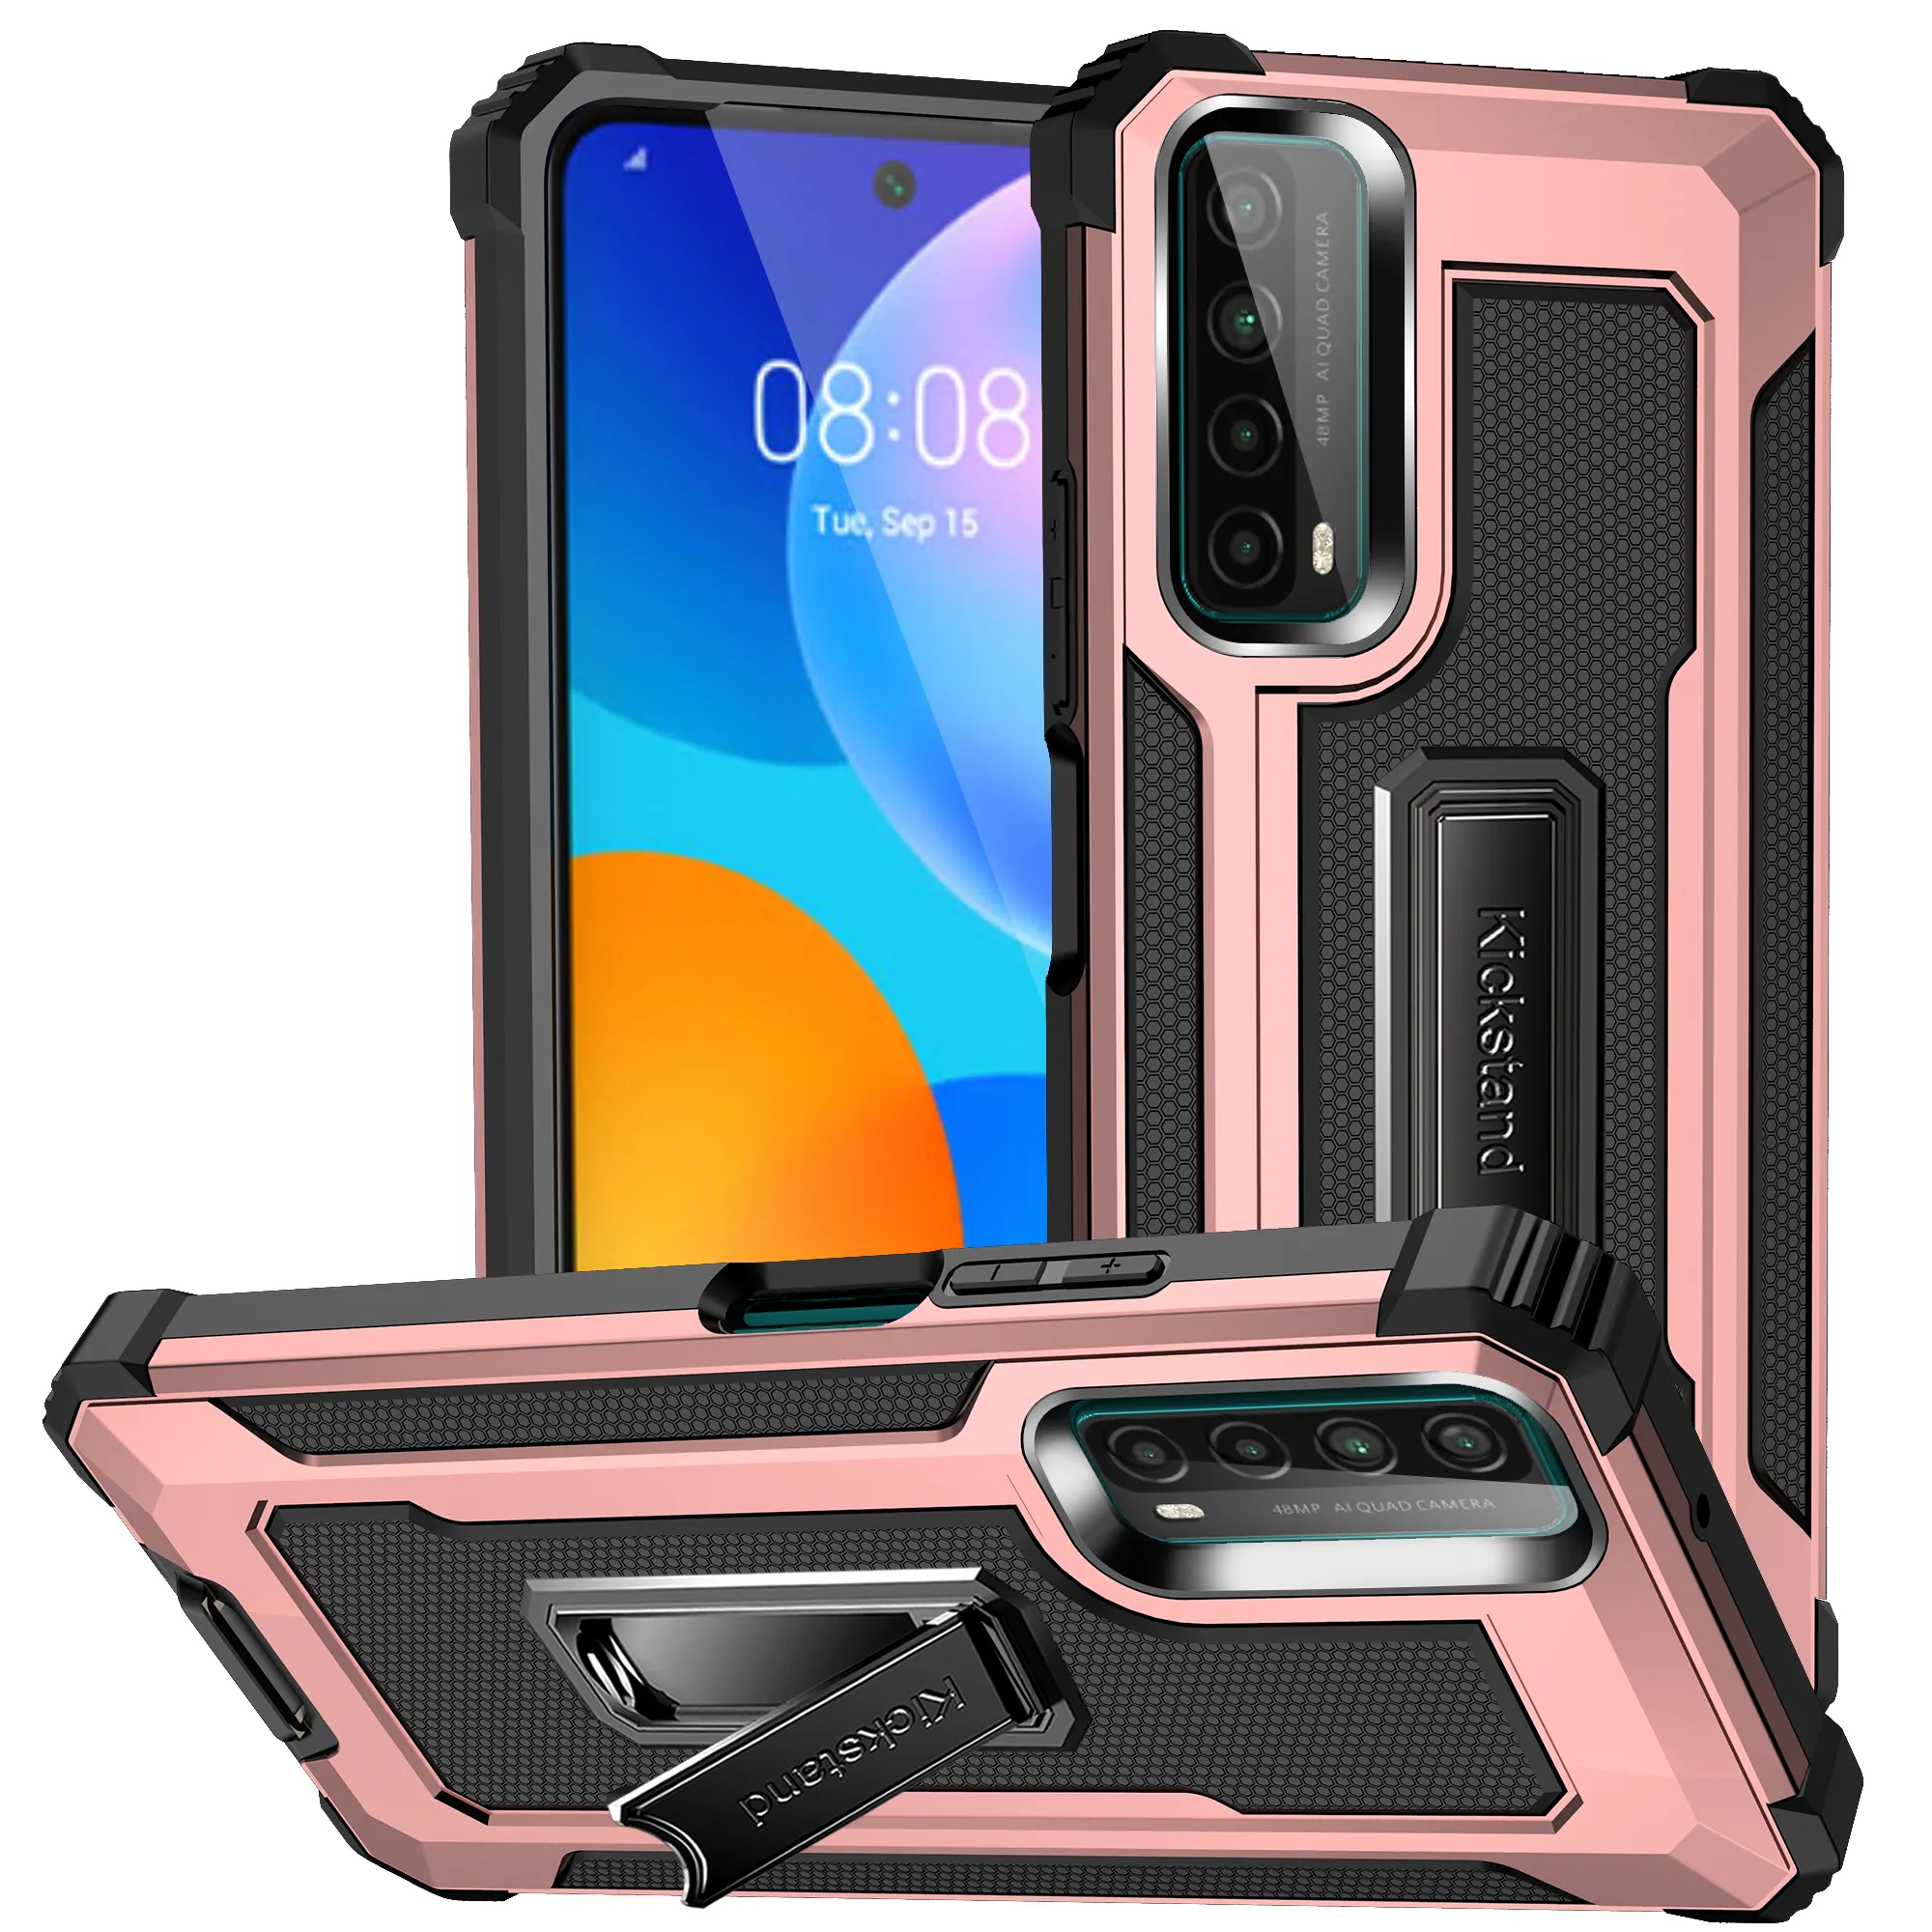 2021 New Design 2 In 1 Metal Kickstand Back Cover Mobile Phone Accessories Case For Huawei Y9a Y7a Y9 Prime 2019 Mate 40 Pro